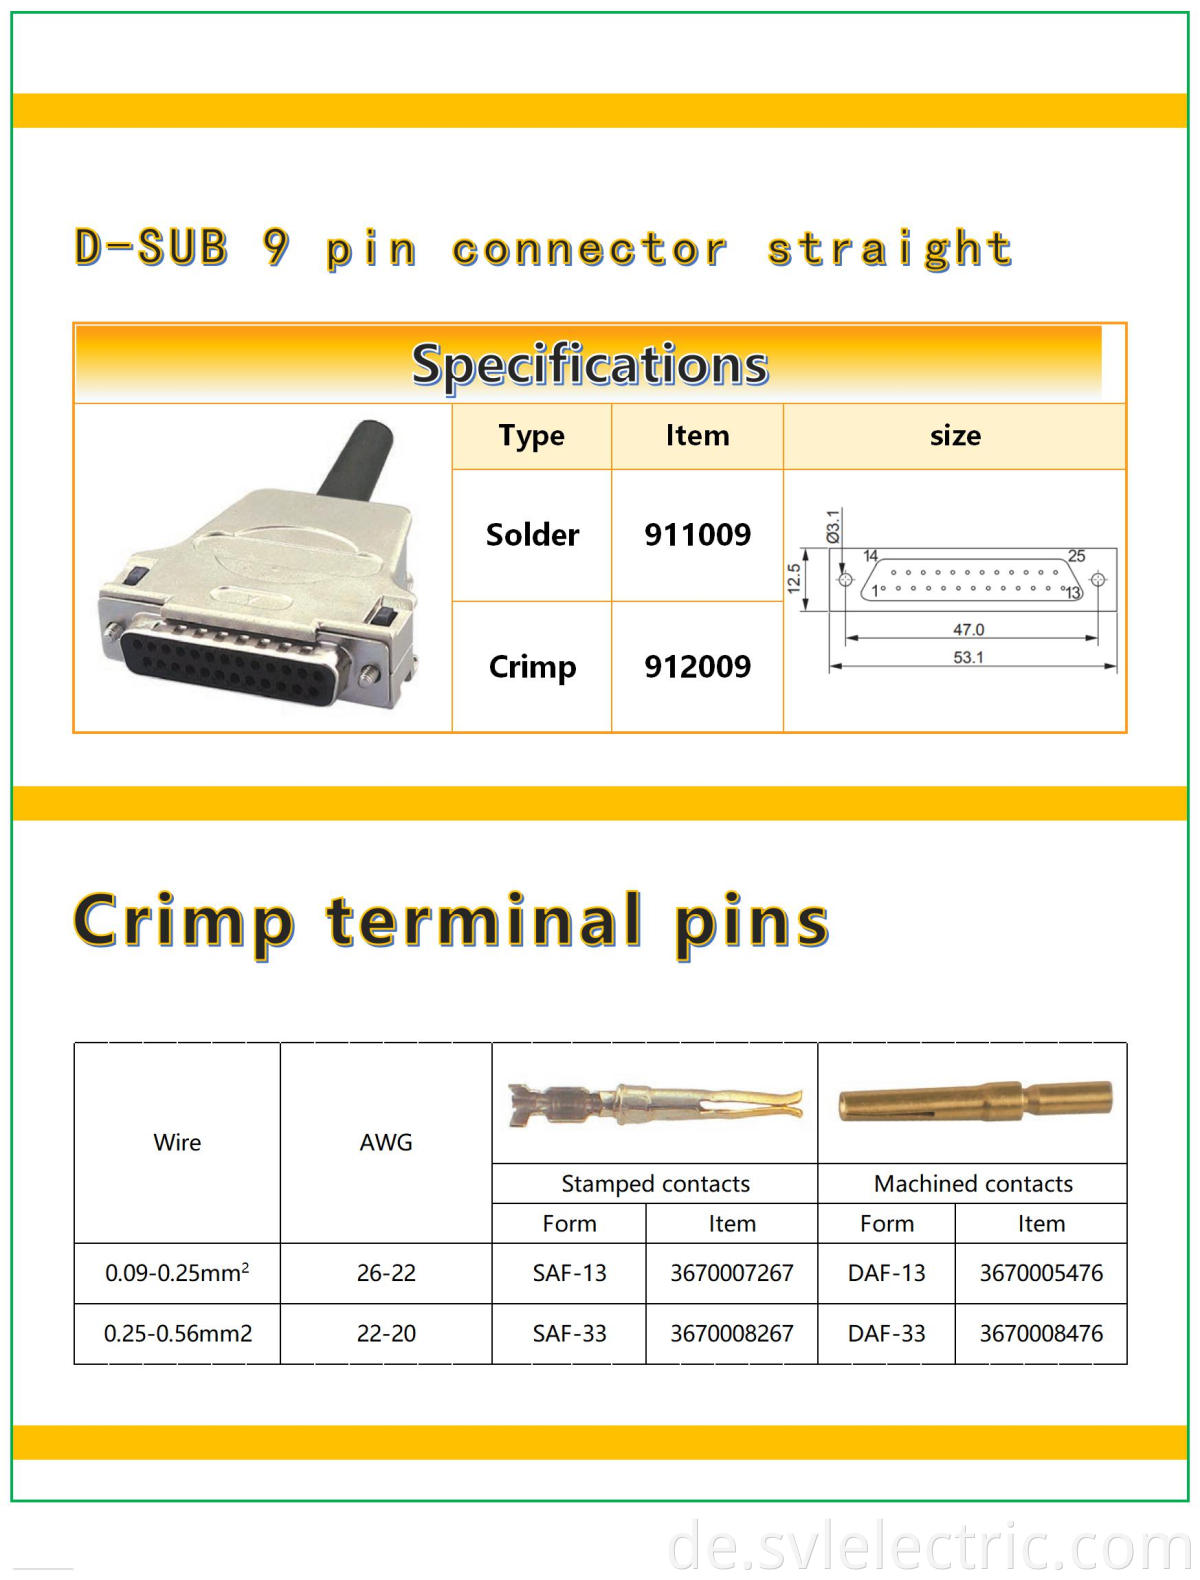 D-sub 25 pin female connector